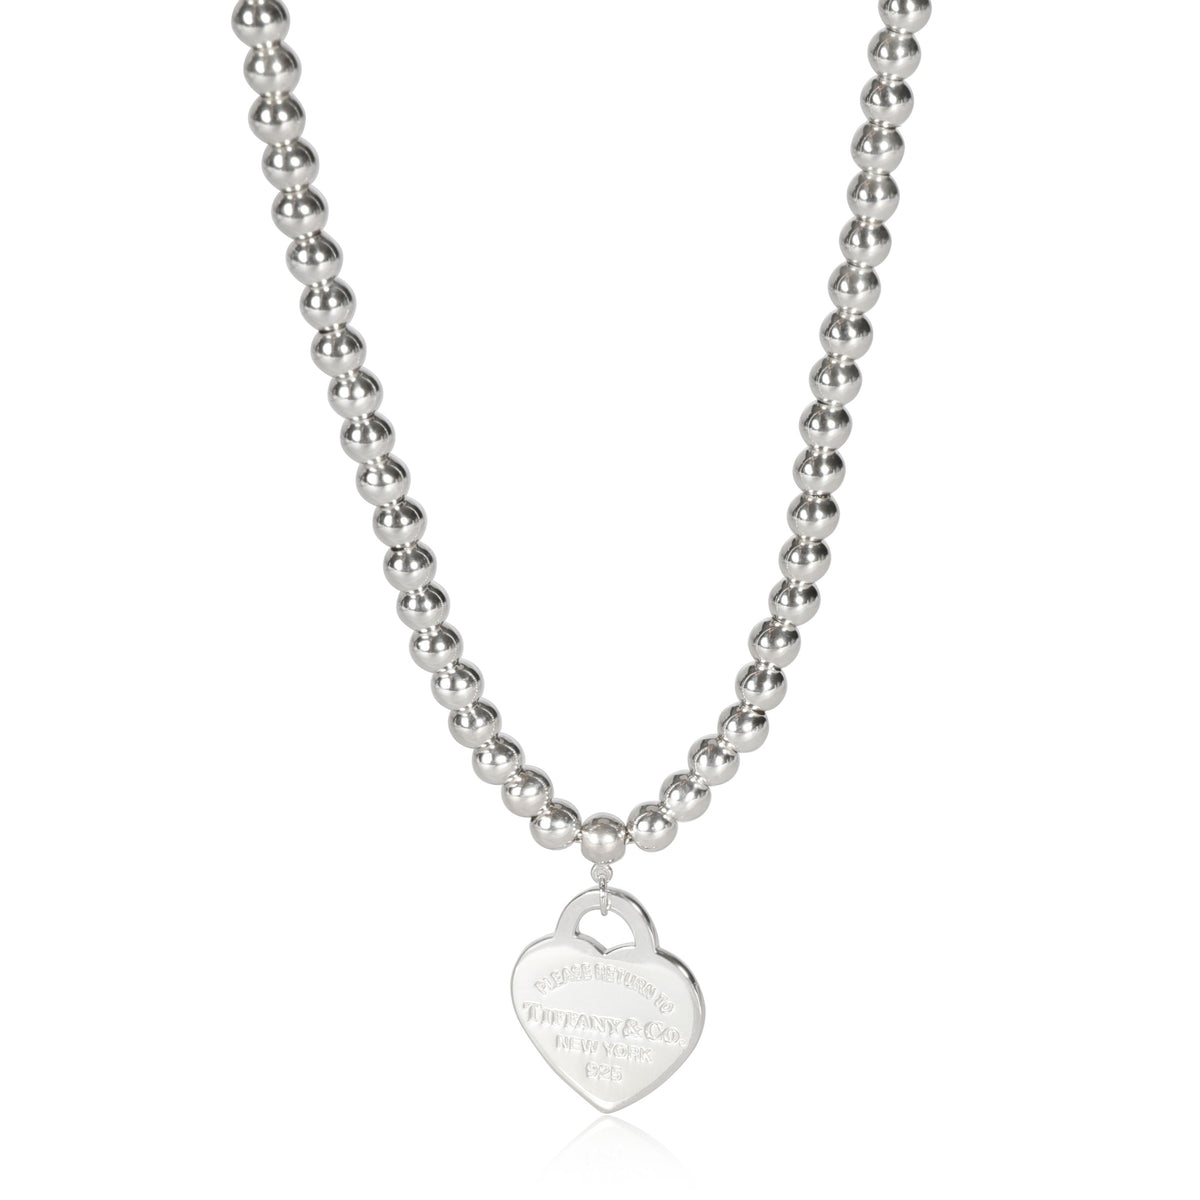 Tiffany & Co. Return to Tiffany Heart Tag Bead Necklace in Sterling Silver